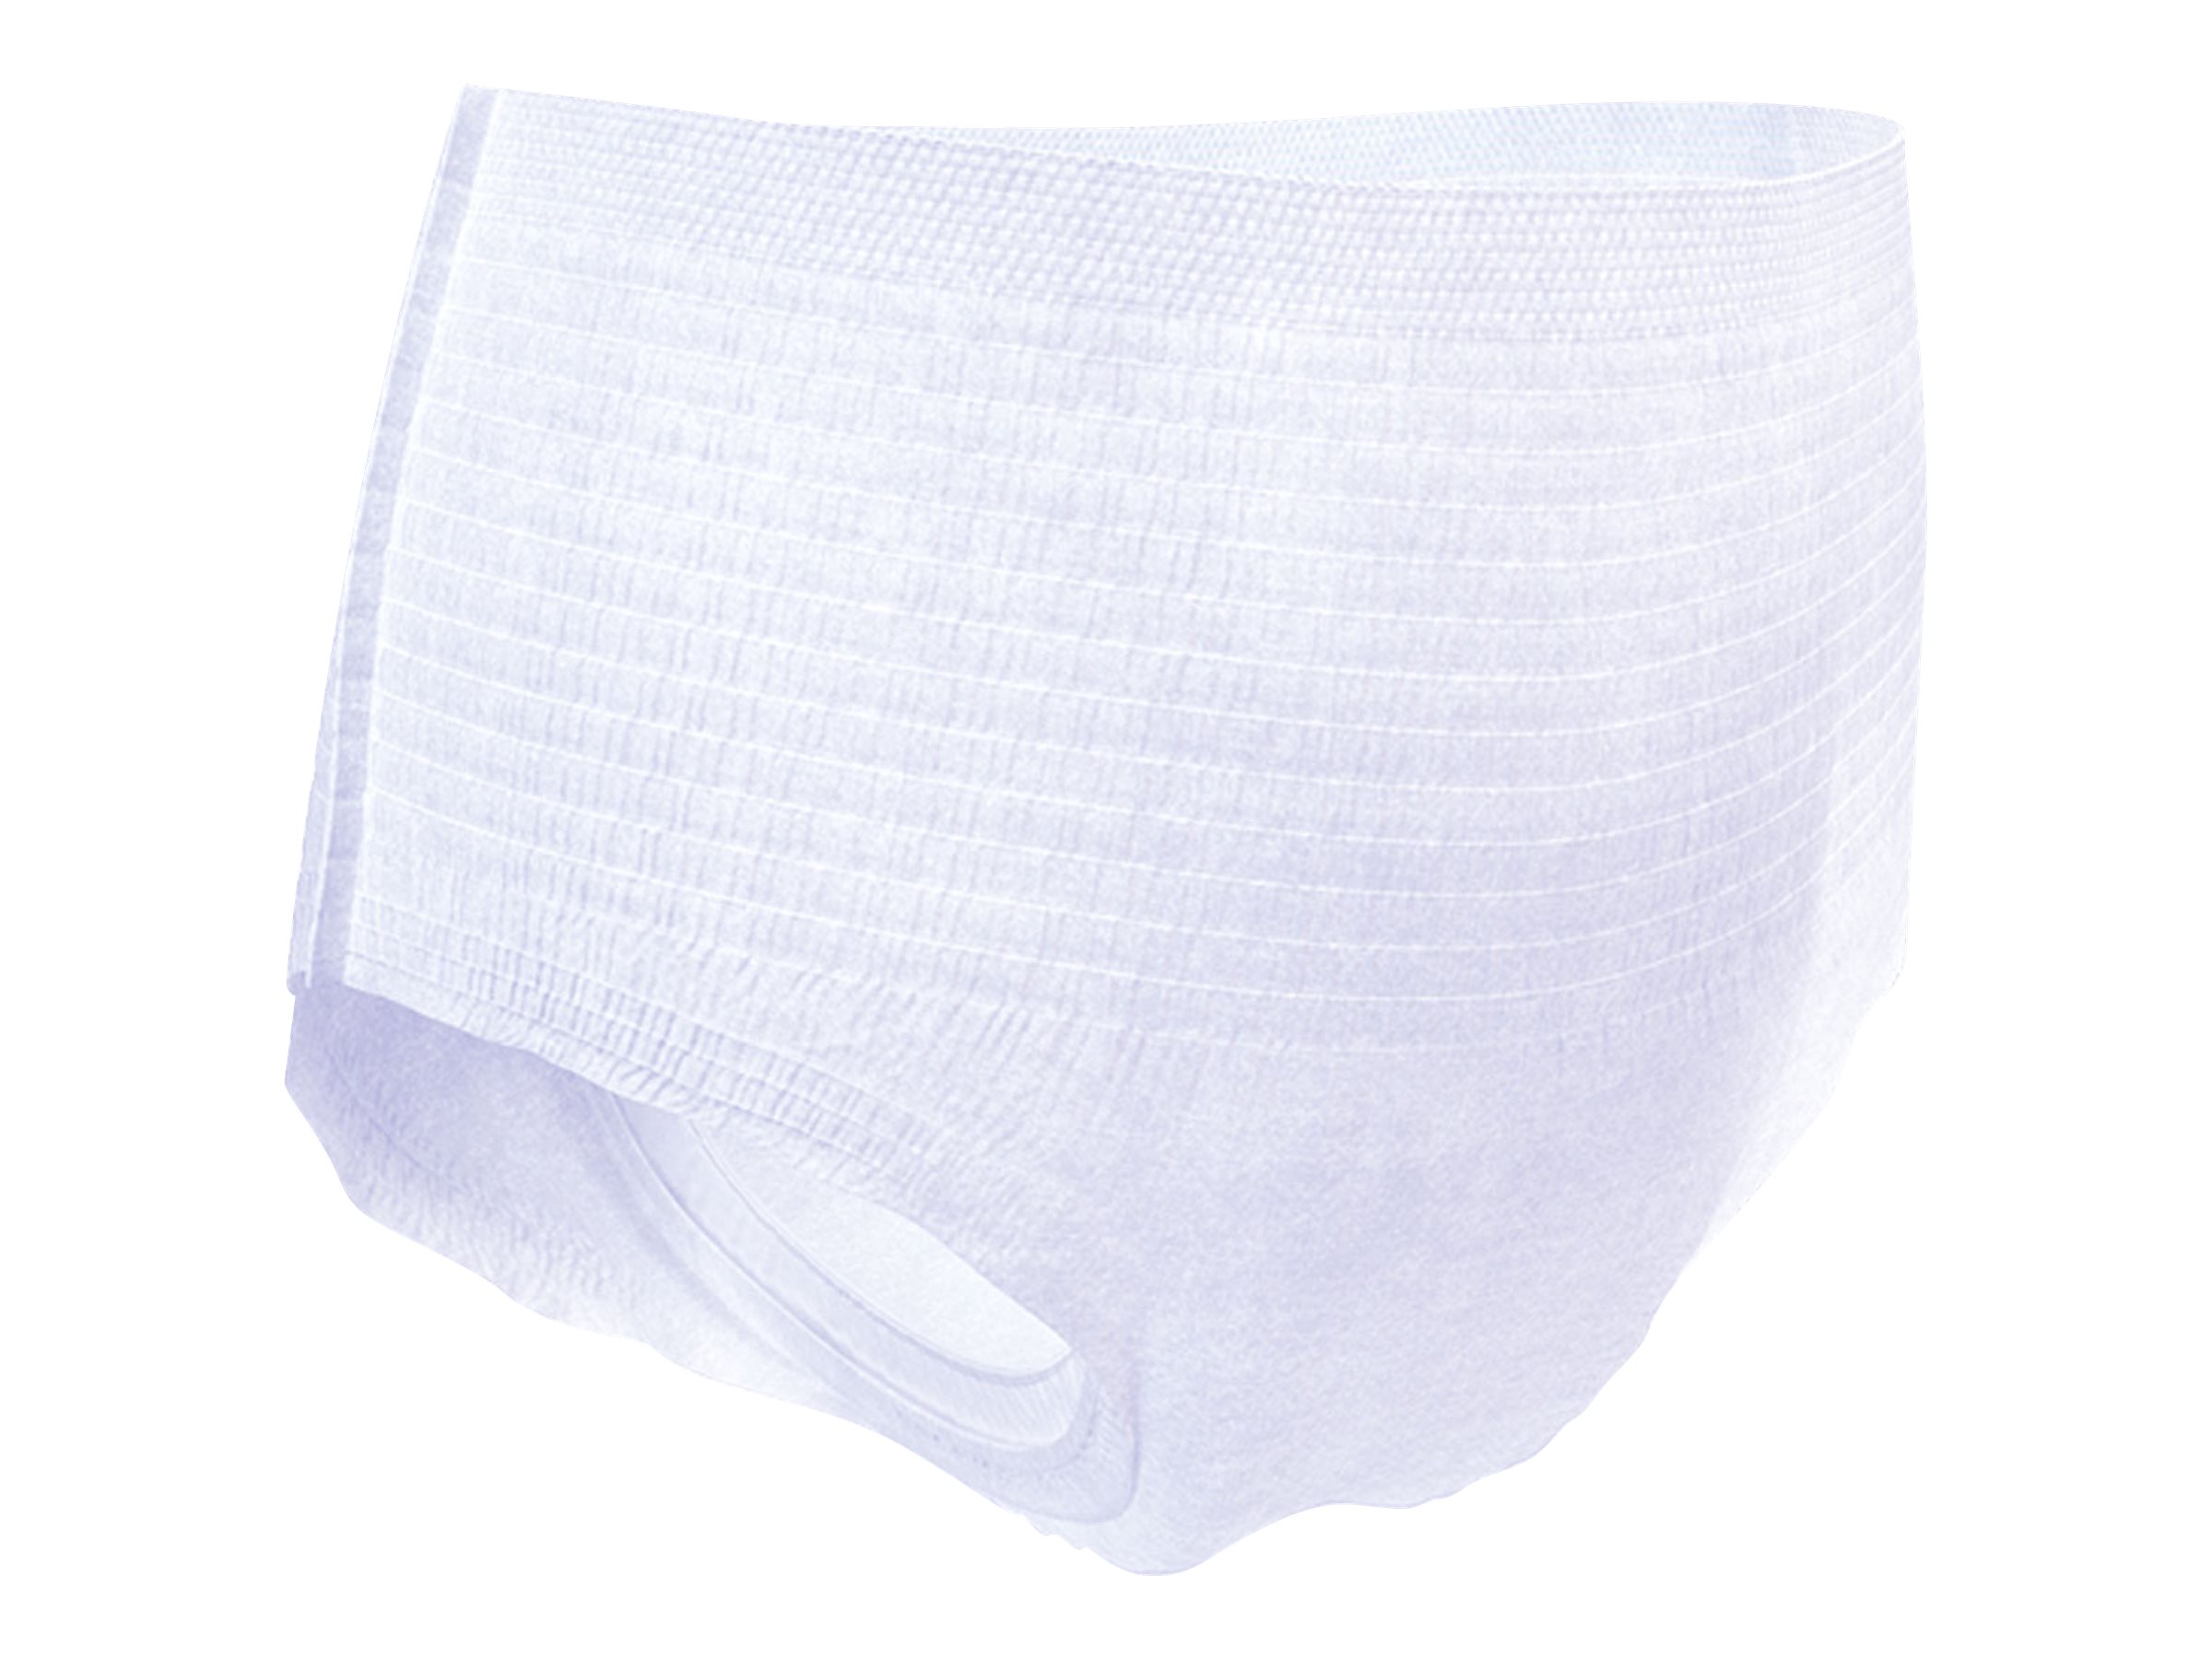 Overnight Incontinence Underwear Absorbency, Large, 11 units – Tena :  Incontinence